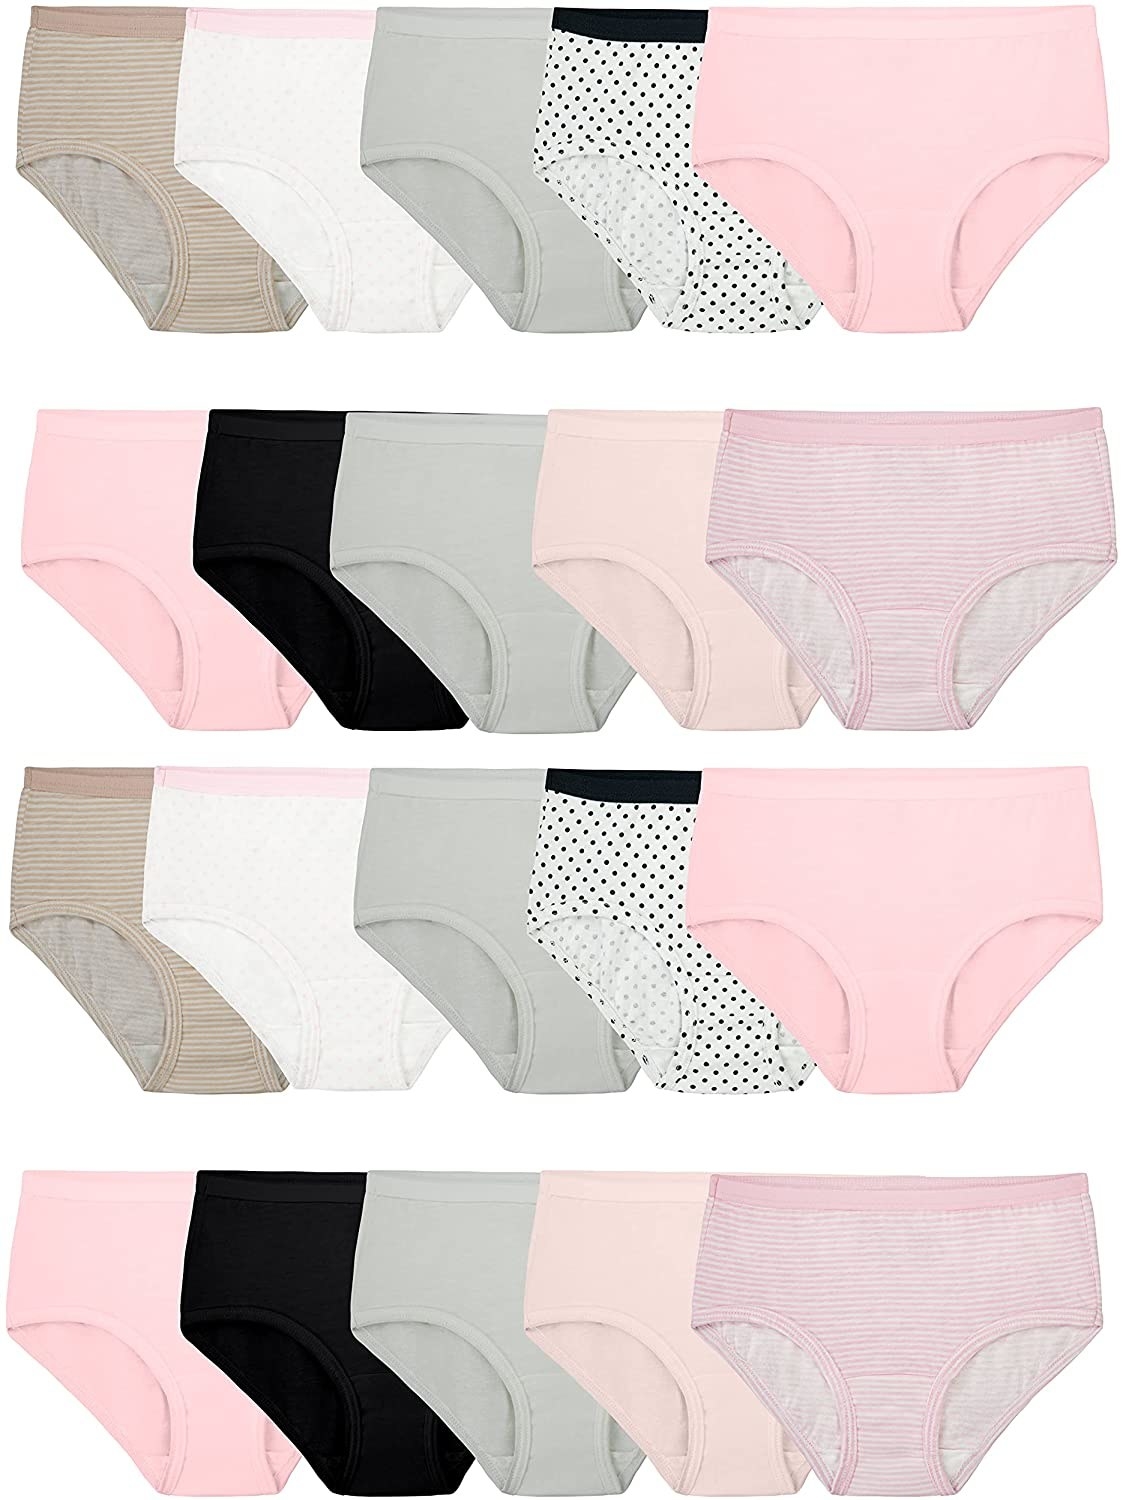 20 pieces of underwear in black, pink, grey and tan colors